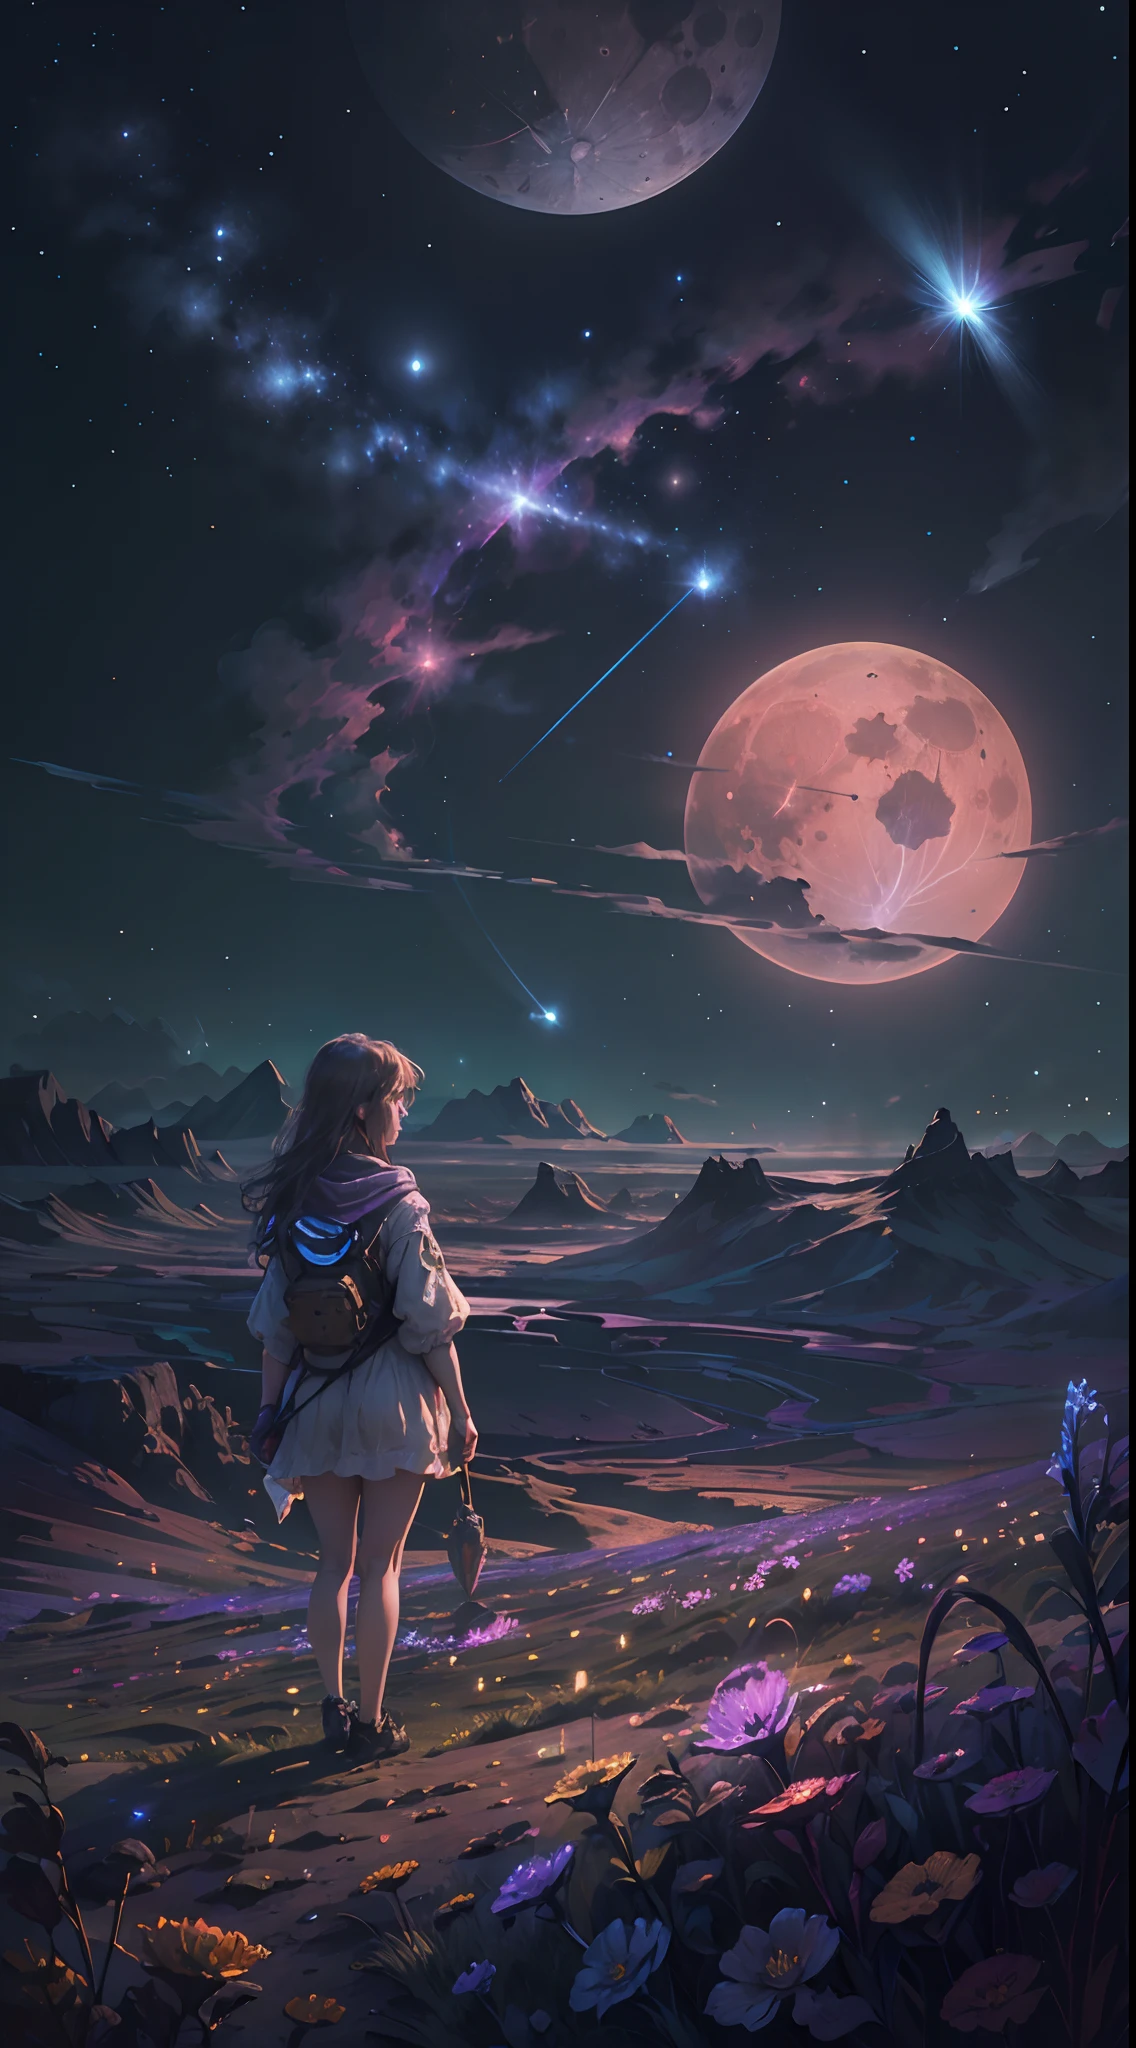 expansive landscape photograph, (Look below.), Above is the sky, Below is an open field), A girl standing on a flower field looking up, (Full Moon: 1.2), (Meteor: 0.9), (Nebula: 1.3), distant mountain, Tree BREAK making art, (Warm light source: 1.2), (Firefly: 1.2), lights, Lots of purple and orange, complicated detail, volume lighting, Realism BREAK (Masterpiece: 1.2), （best quality）, Ultra-detailed, (Dynamic composition: 1.4), RAWExtremely detailed, Colorful details, (Rainbow colors: 1.2), (glowing lighting, atmospheric lighting), Dreamlike, Magical, (Solo: 1.2), 4k